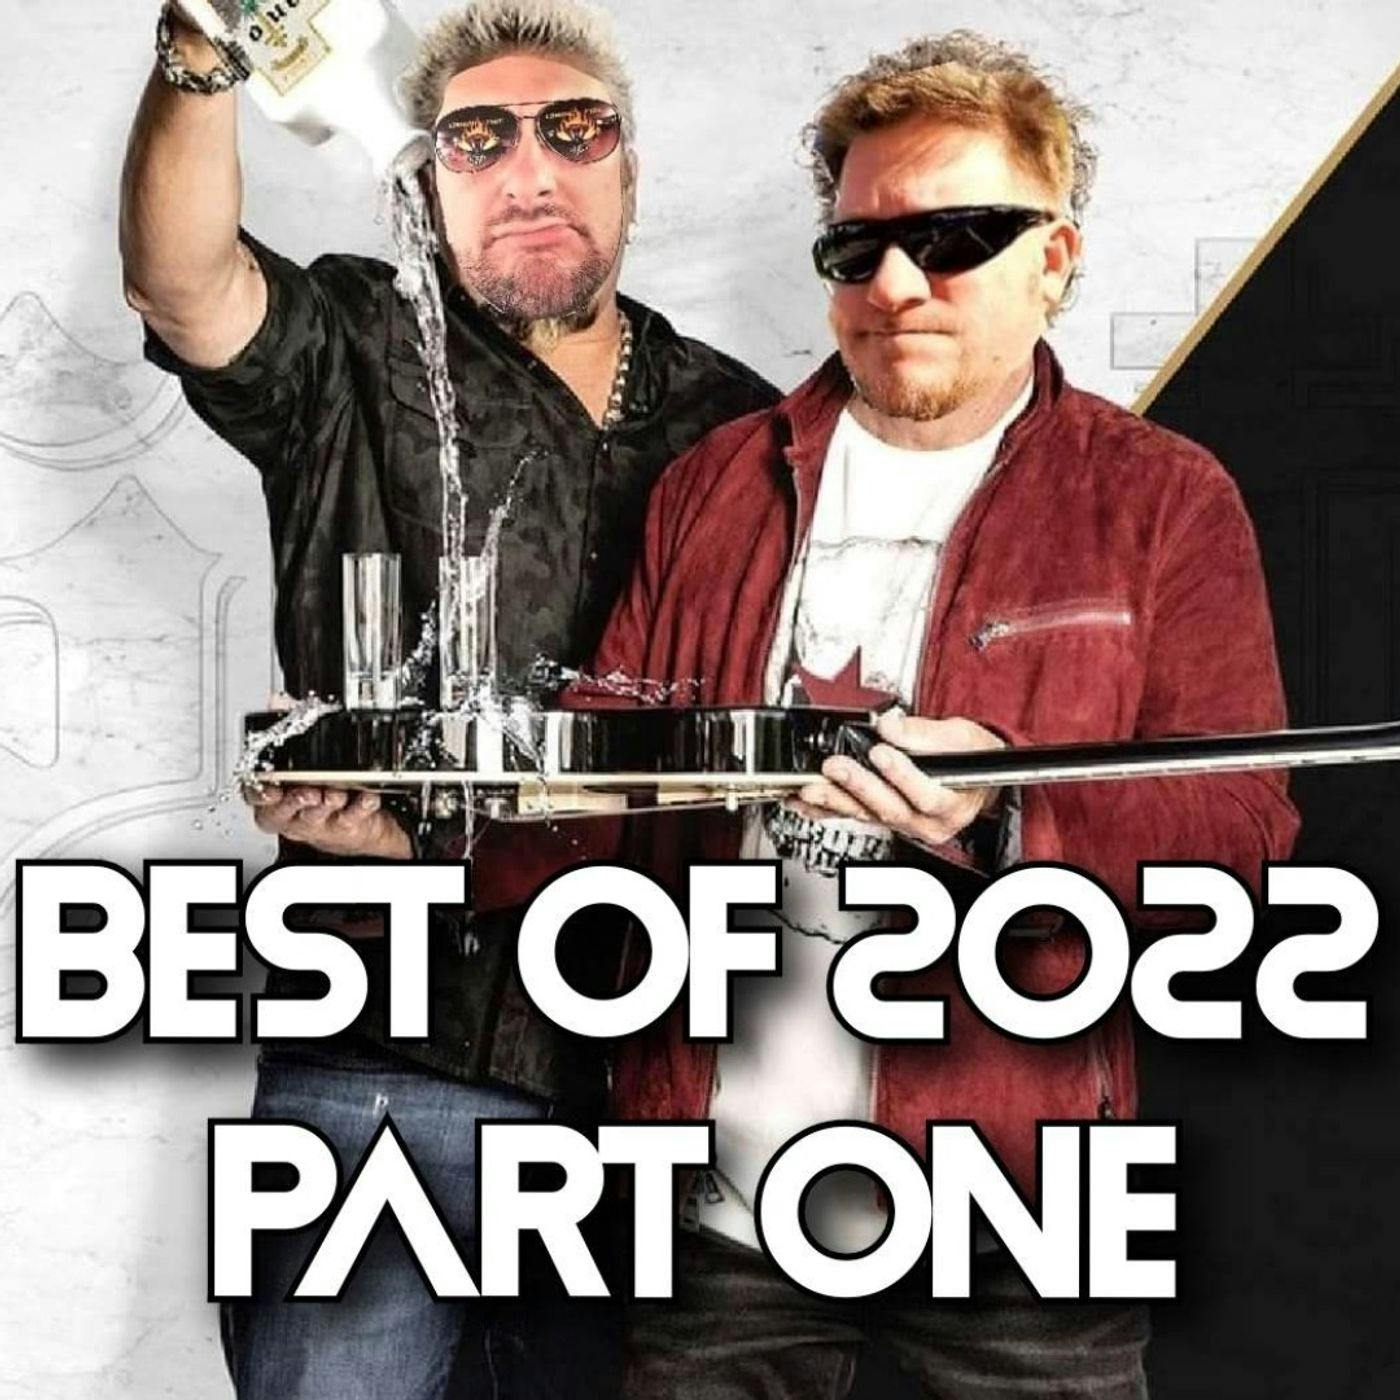 The Best of Cobras & Fire 2022 Part One